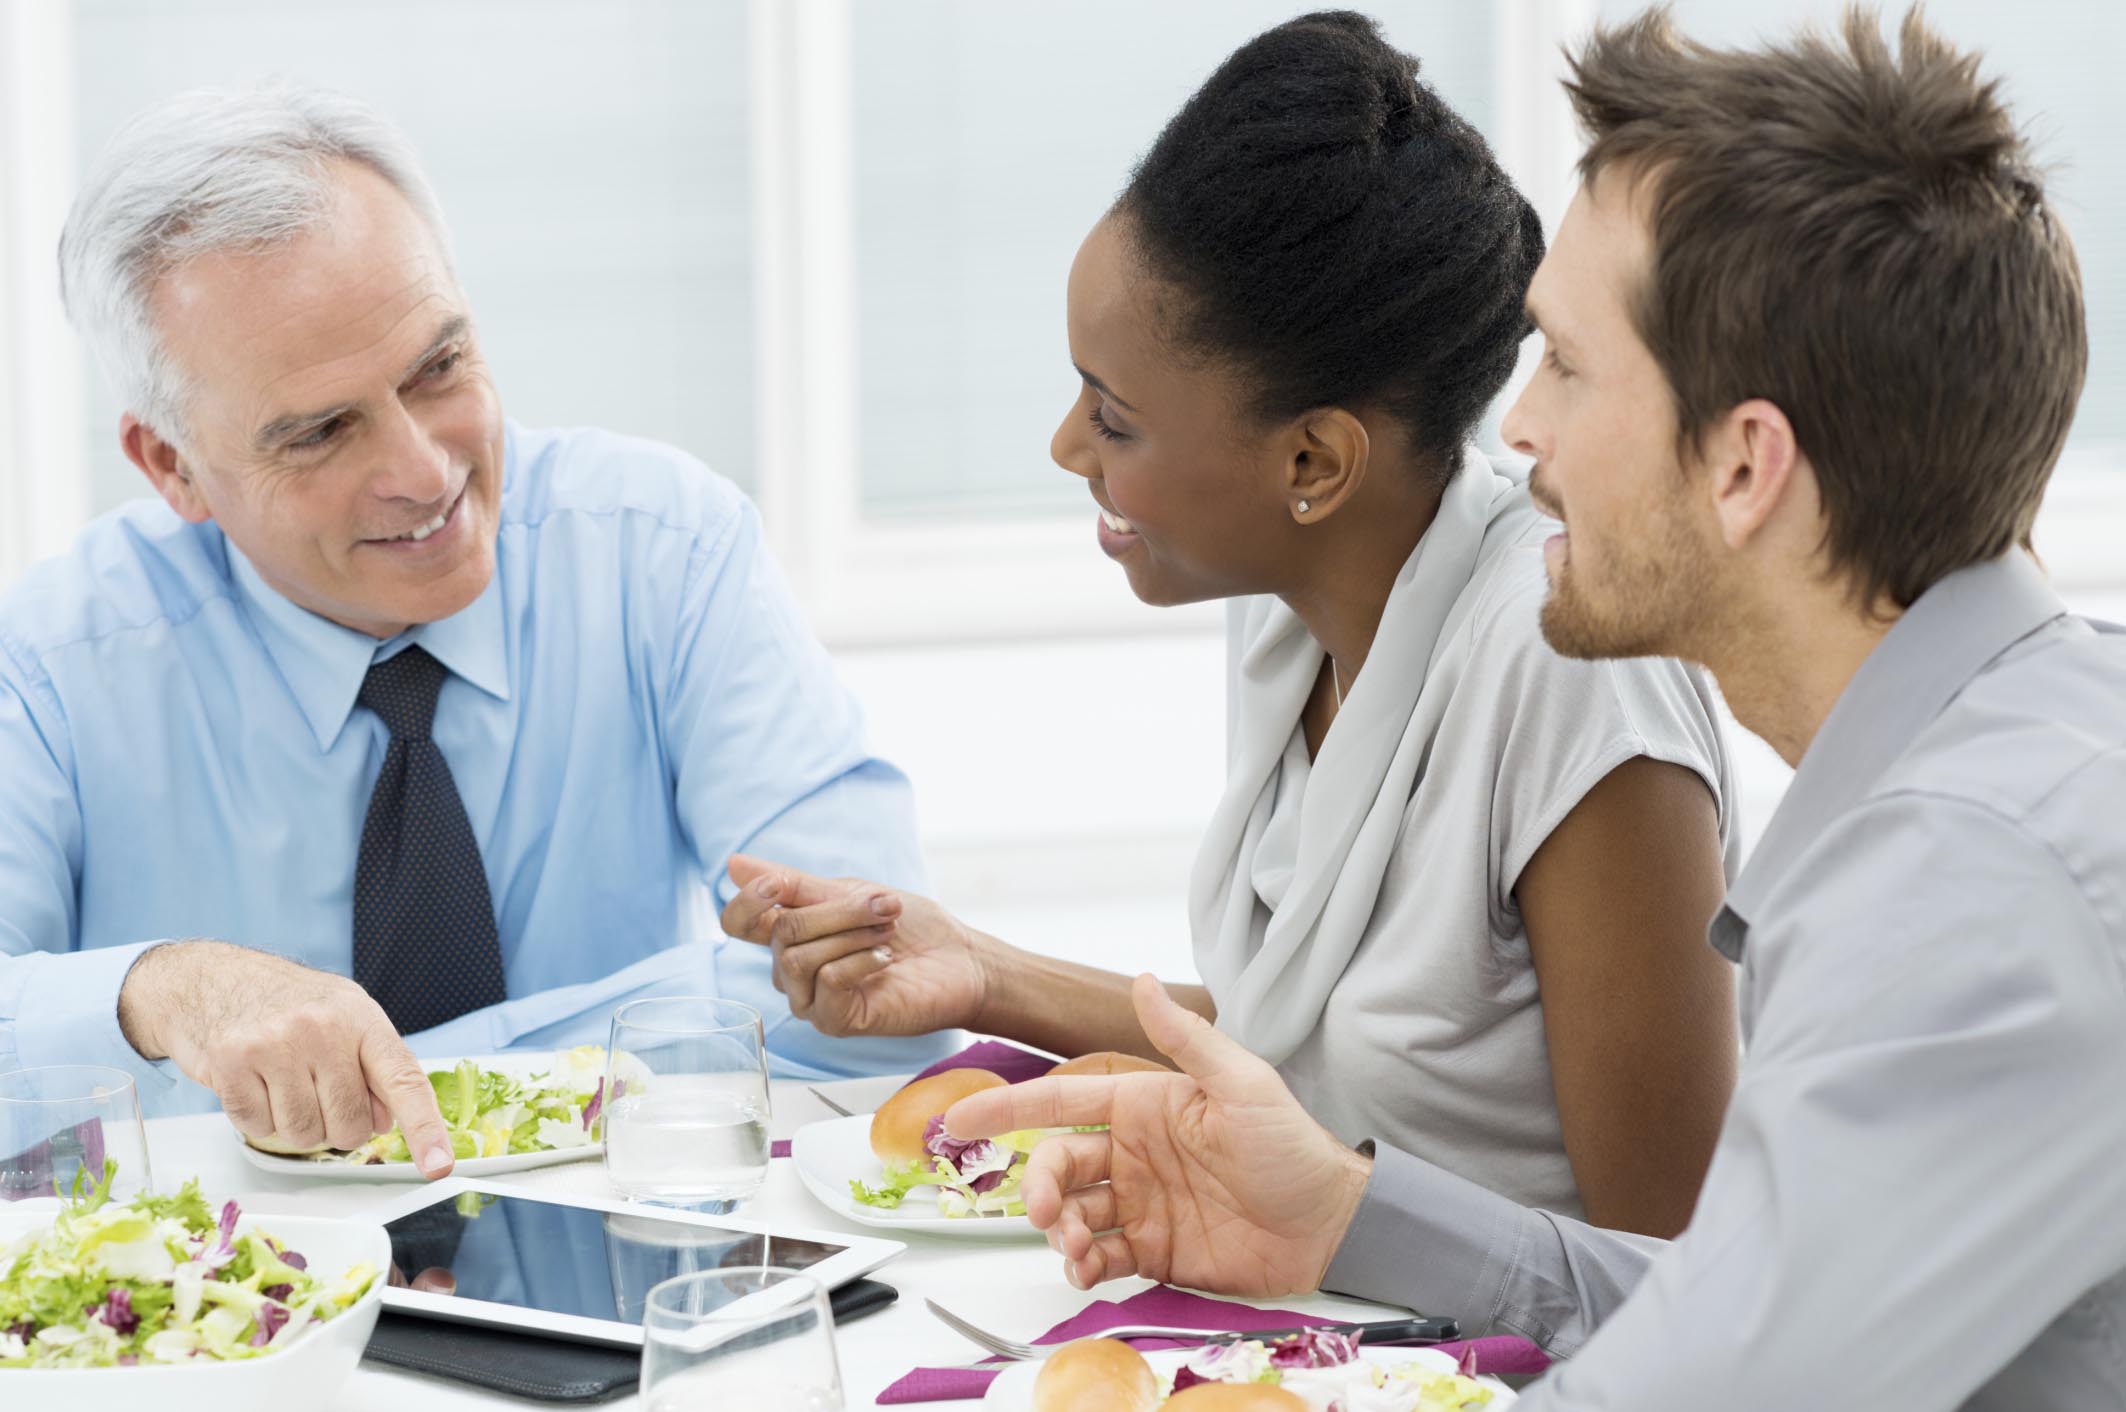 s_business-dinner-black woman - 1 young white male - 1 old white male#